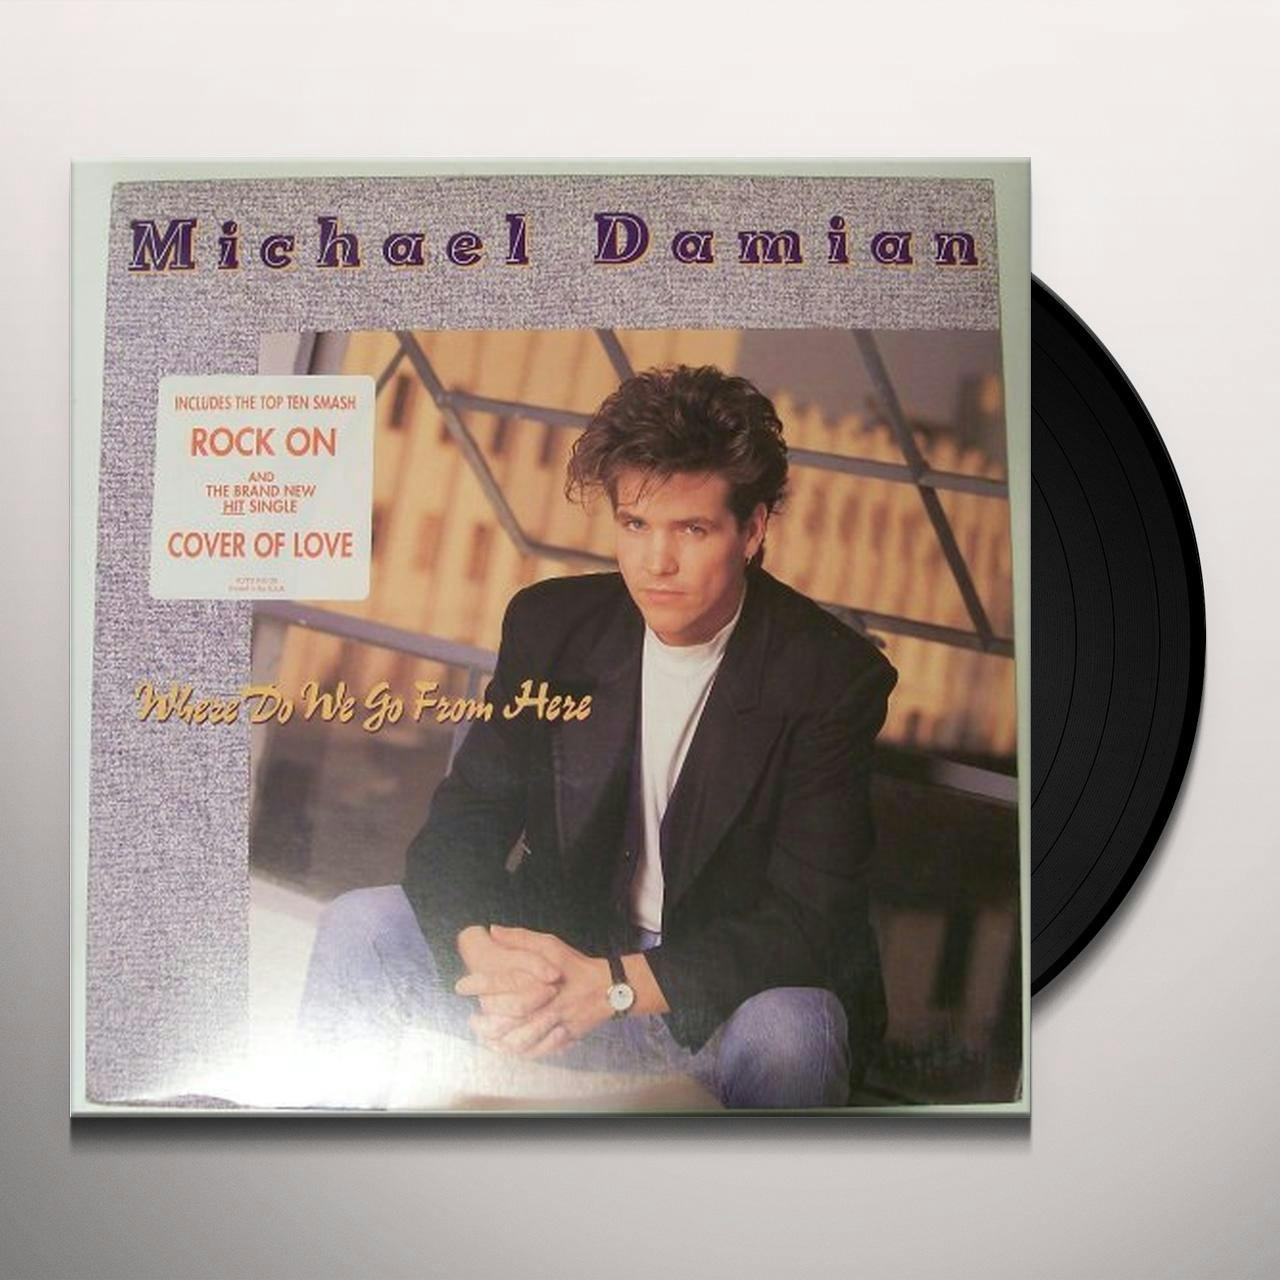 We　Vinyl　Here　Do　From　Record　Where　Damian　Michael　Go